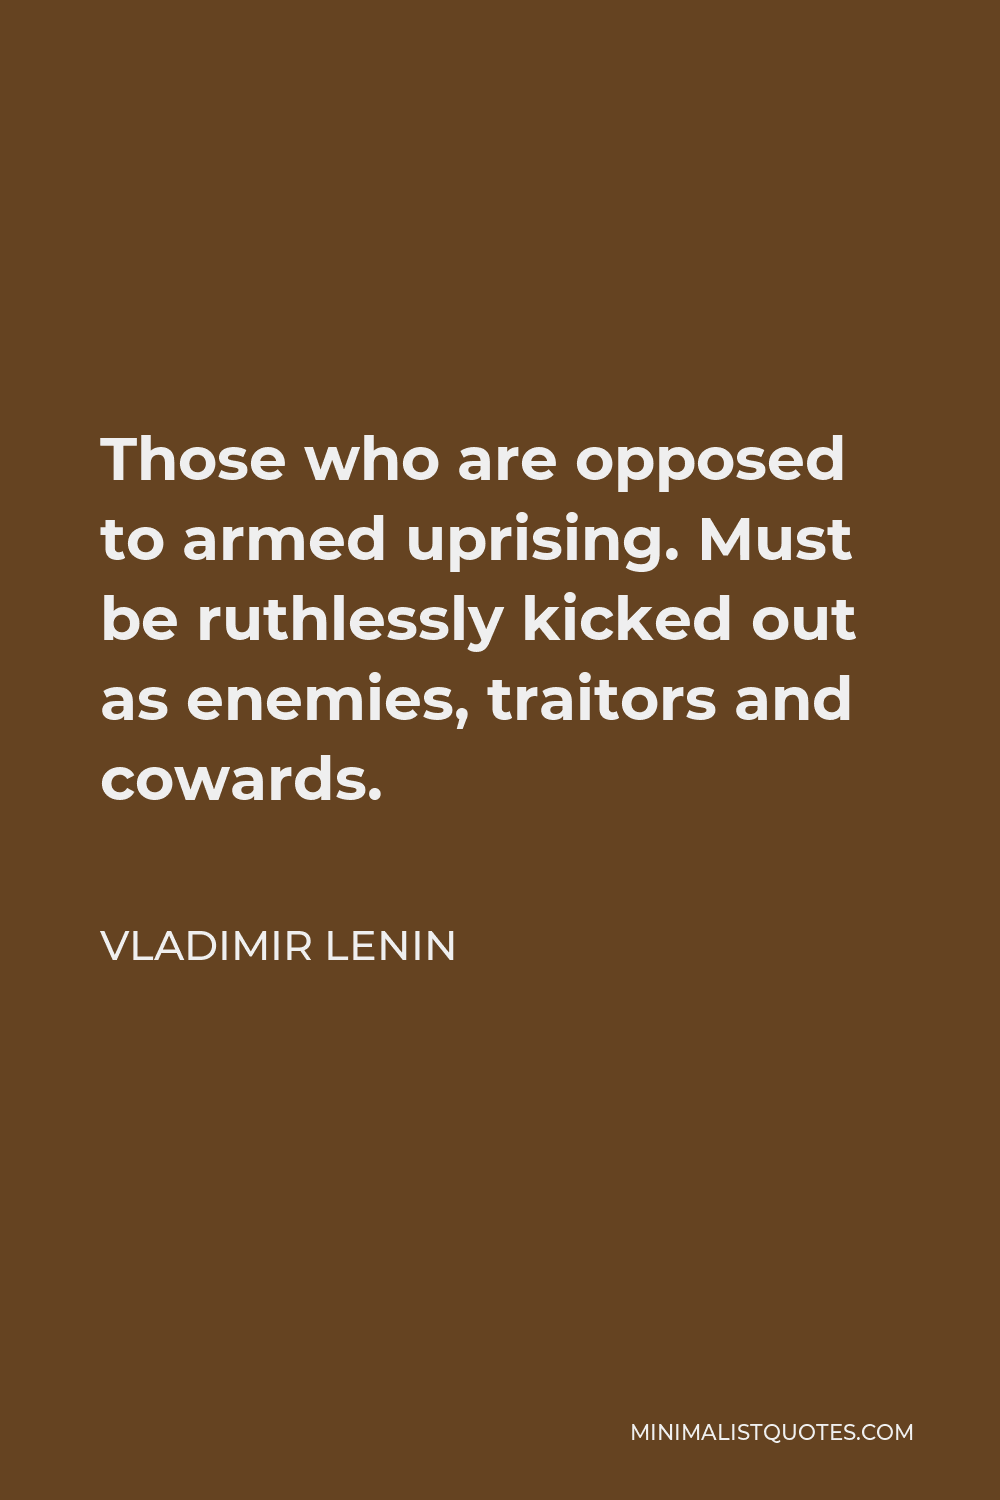 Vladimir Lenin Quote - Those who are opposed to armed uprising. Must be ruthlessly kicked out as enemies, traitors and cowards.